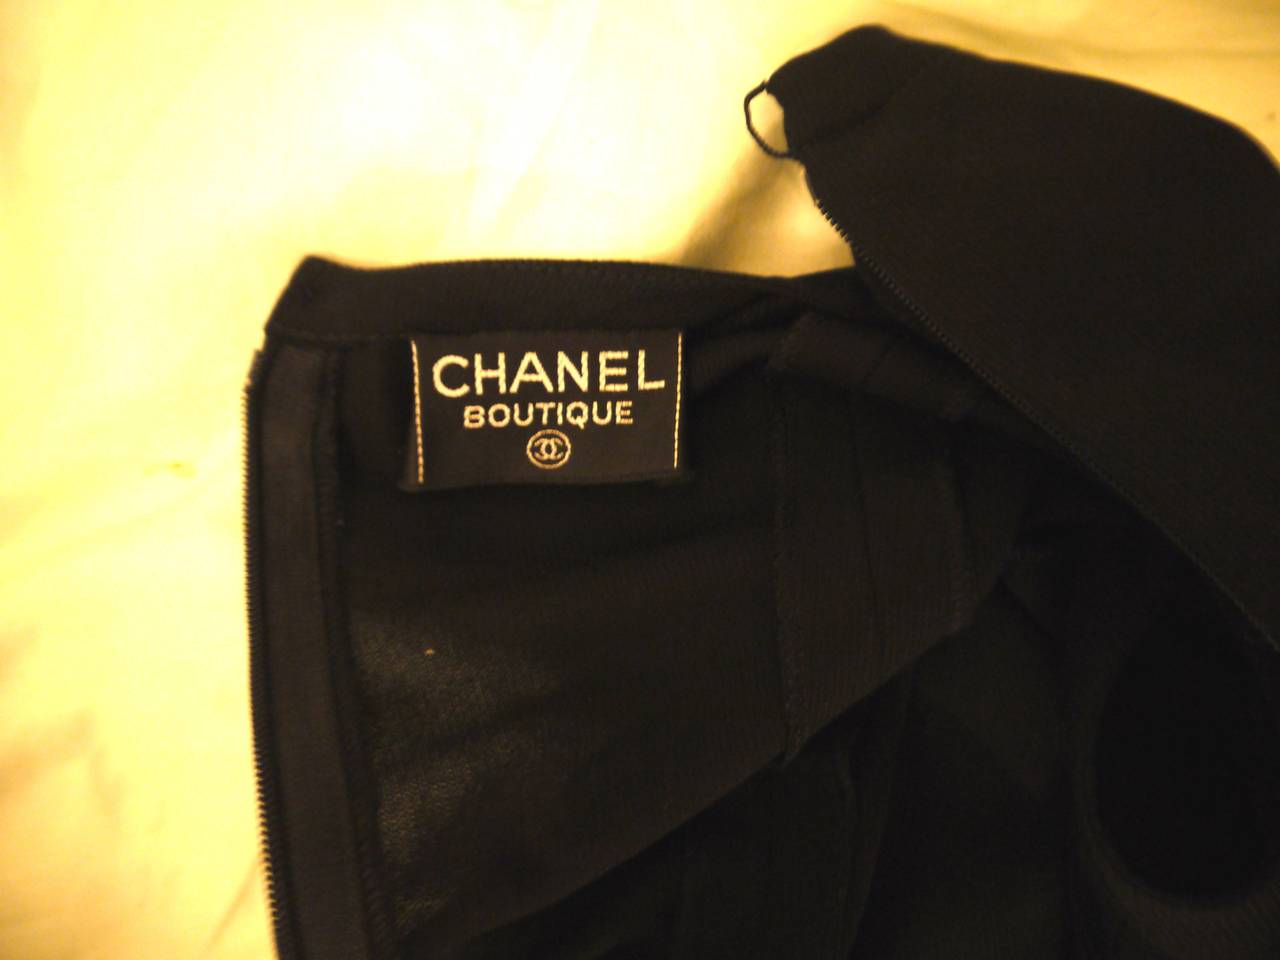 Chanel Black Top with Zipper Back In Excellent Condition For Sale In Boca Raton, FL